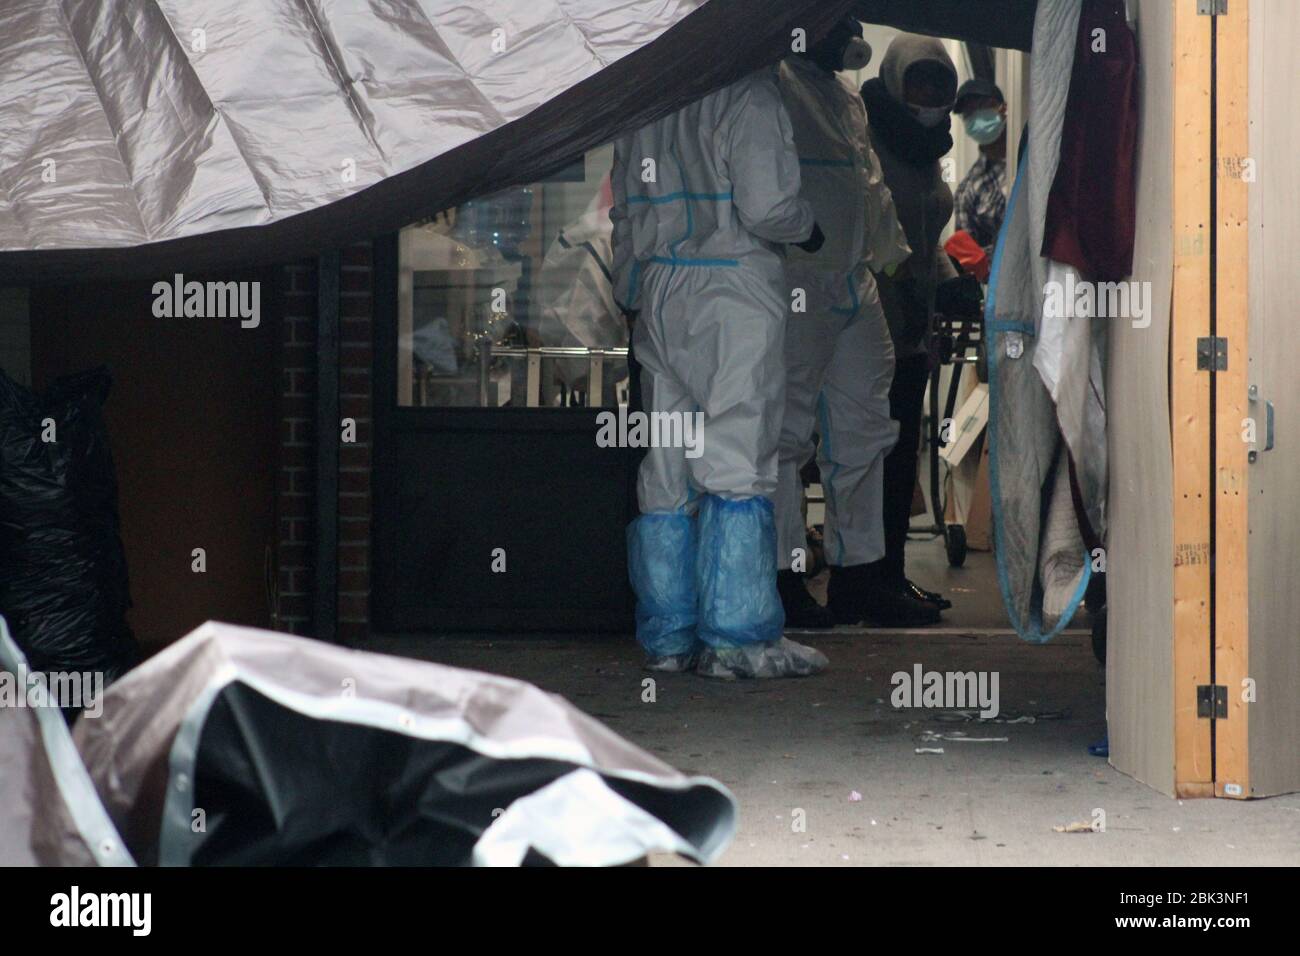 New York, New York, USA. 30th Apr, 2020. Workers dressed in a hazmat and employees masked faces stand at the entrance to the Andrew T. Cleckley Funeral Home in Brooklyn where bodies non properly cared have been removed. 60 corpses were stored in 4 non-refregerated rented trucks lining the street nearby stores. Neighbors reported a foul smell still persistent and fluids dripping from the trucks. Some remains were also found lying on the facilityÃ¢â‚¬â„¢s floor. The funeral home was overwhelmed by COVID-19 deaths, waiting for weeks for cremations. Credit: Marie Le Ble/ZUMA Wire/Alamy Live News Stock Photo